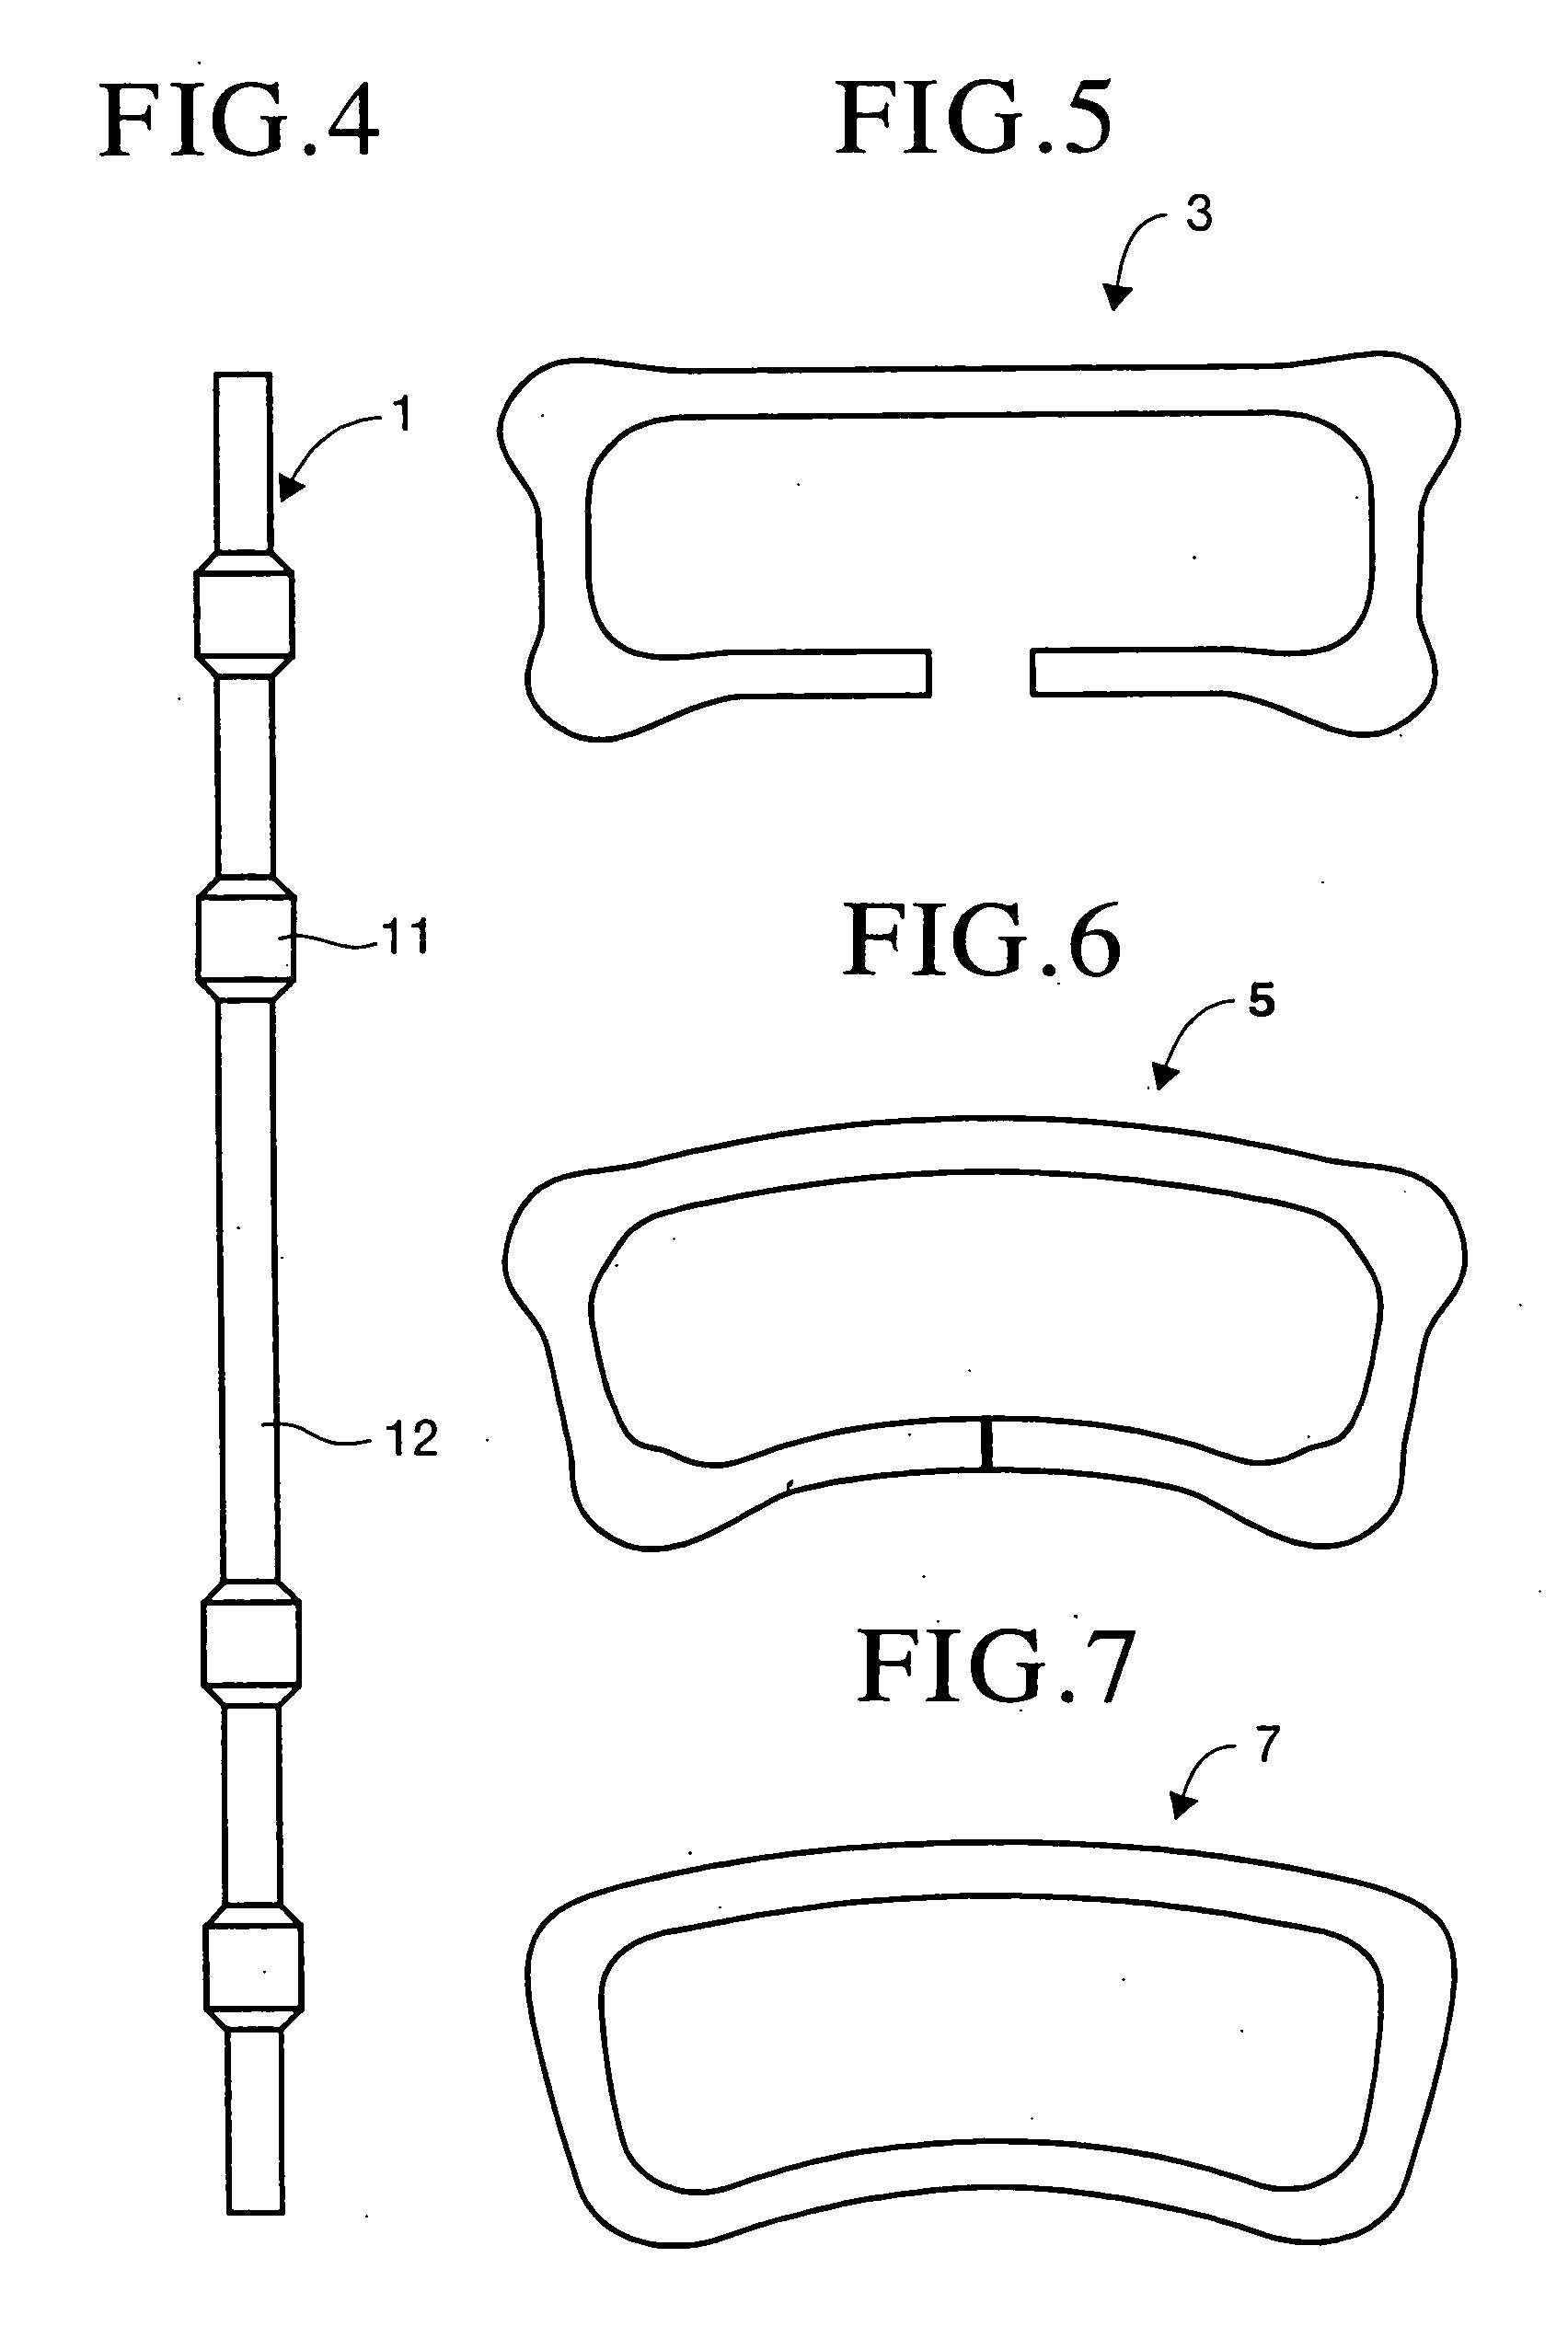 Method of producing polygonal ring-shaped machine parts having complex cross-section